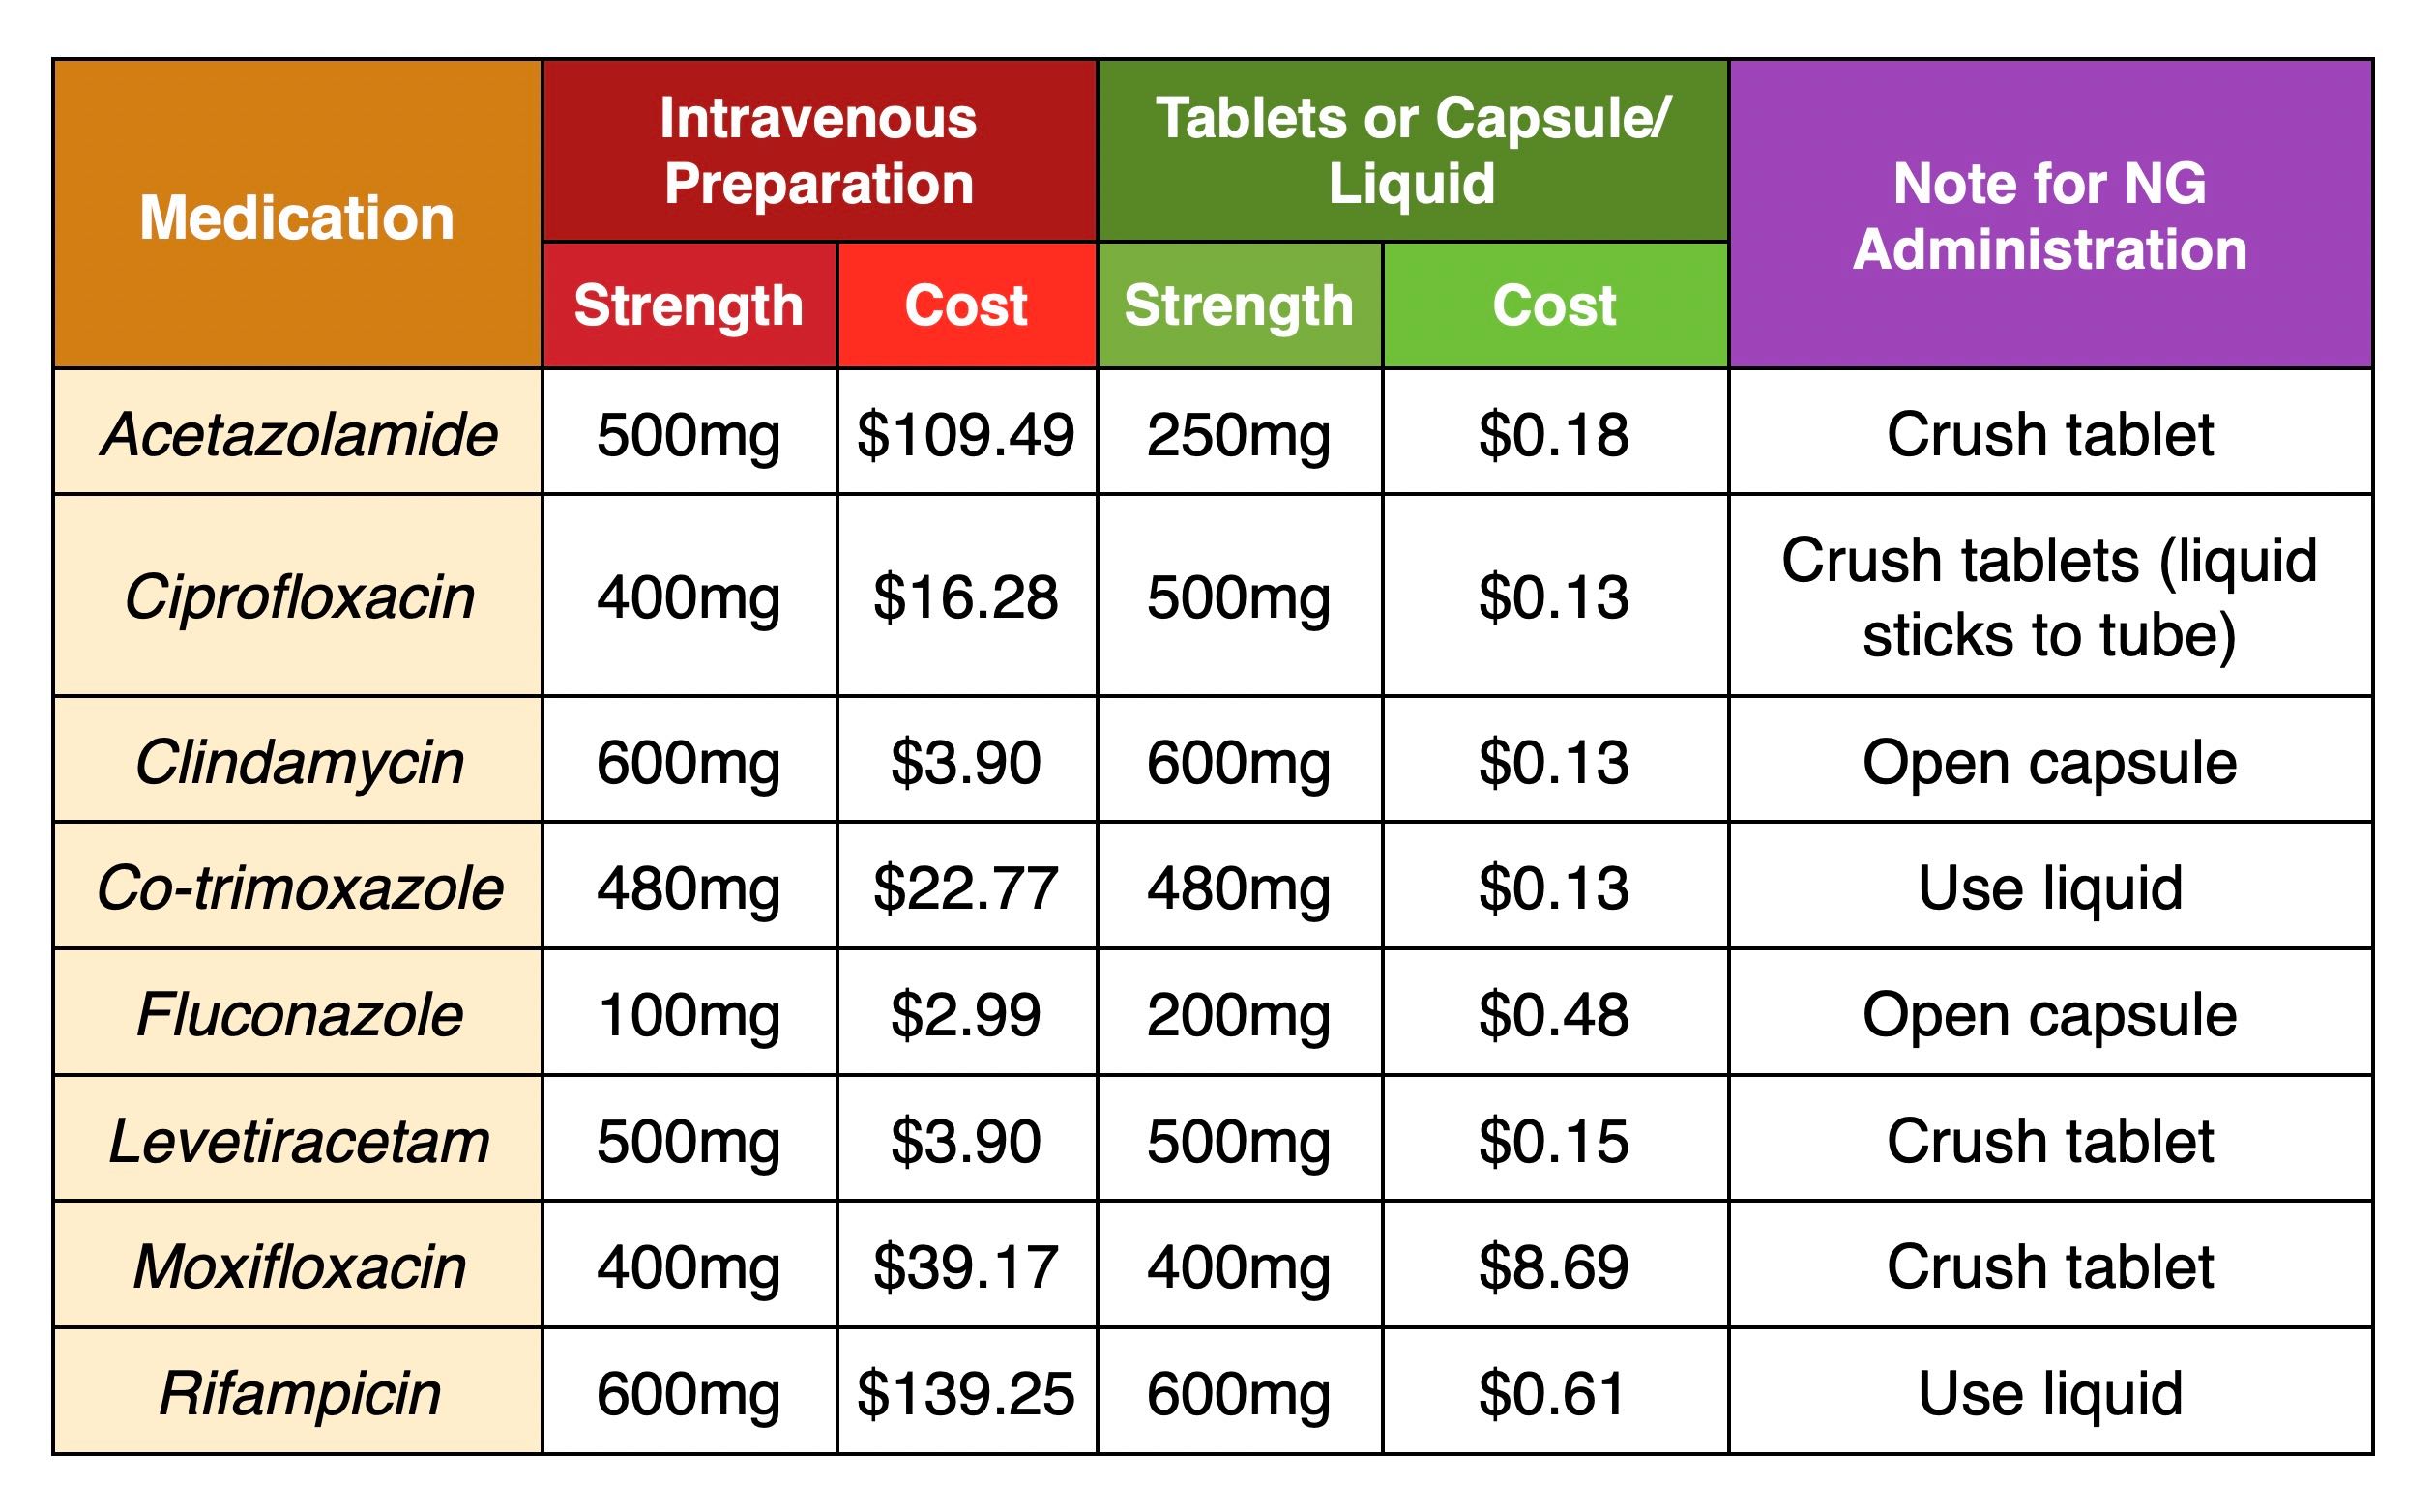 Intraneous vs enteral drug costs